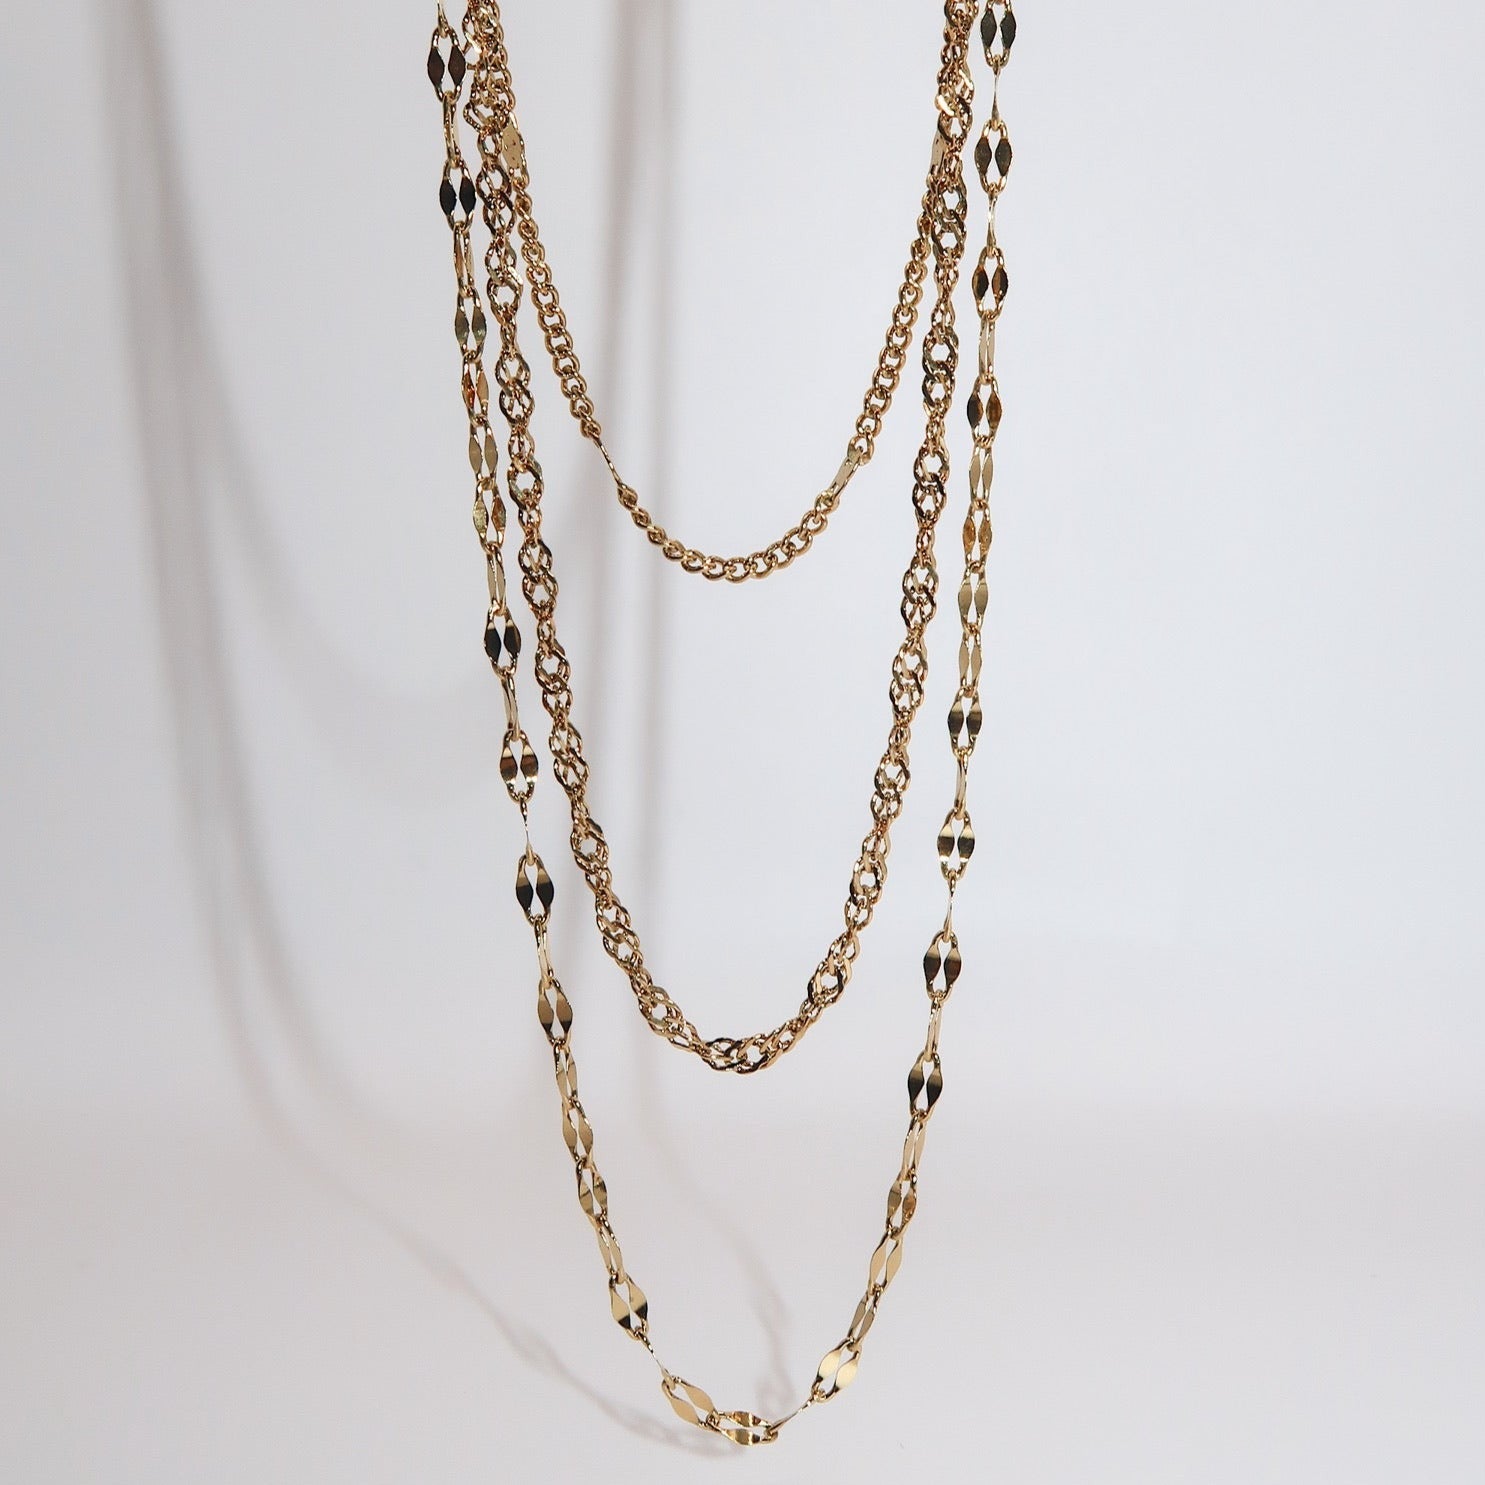 CARISSA - 18K PVD Gold Plated Triple Layered Necklace - Mixed Metals